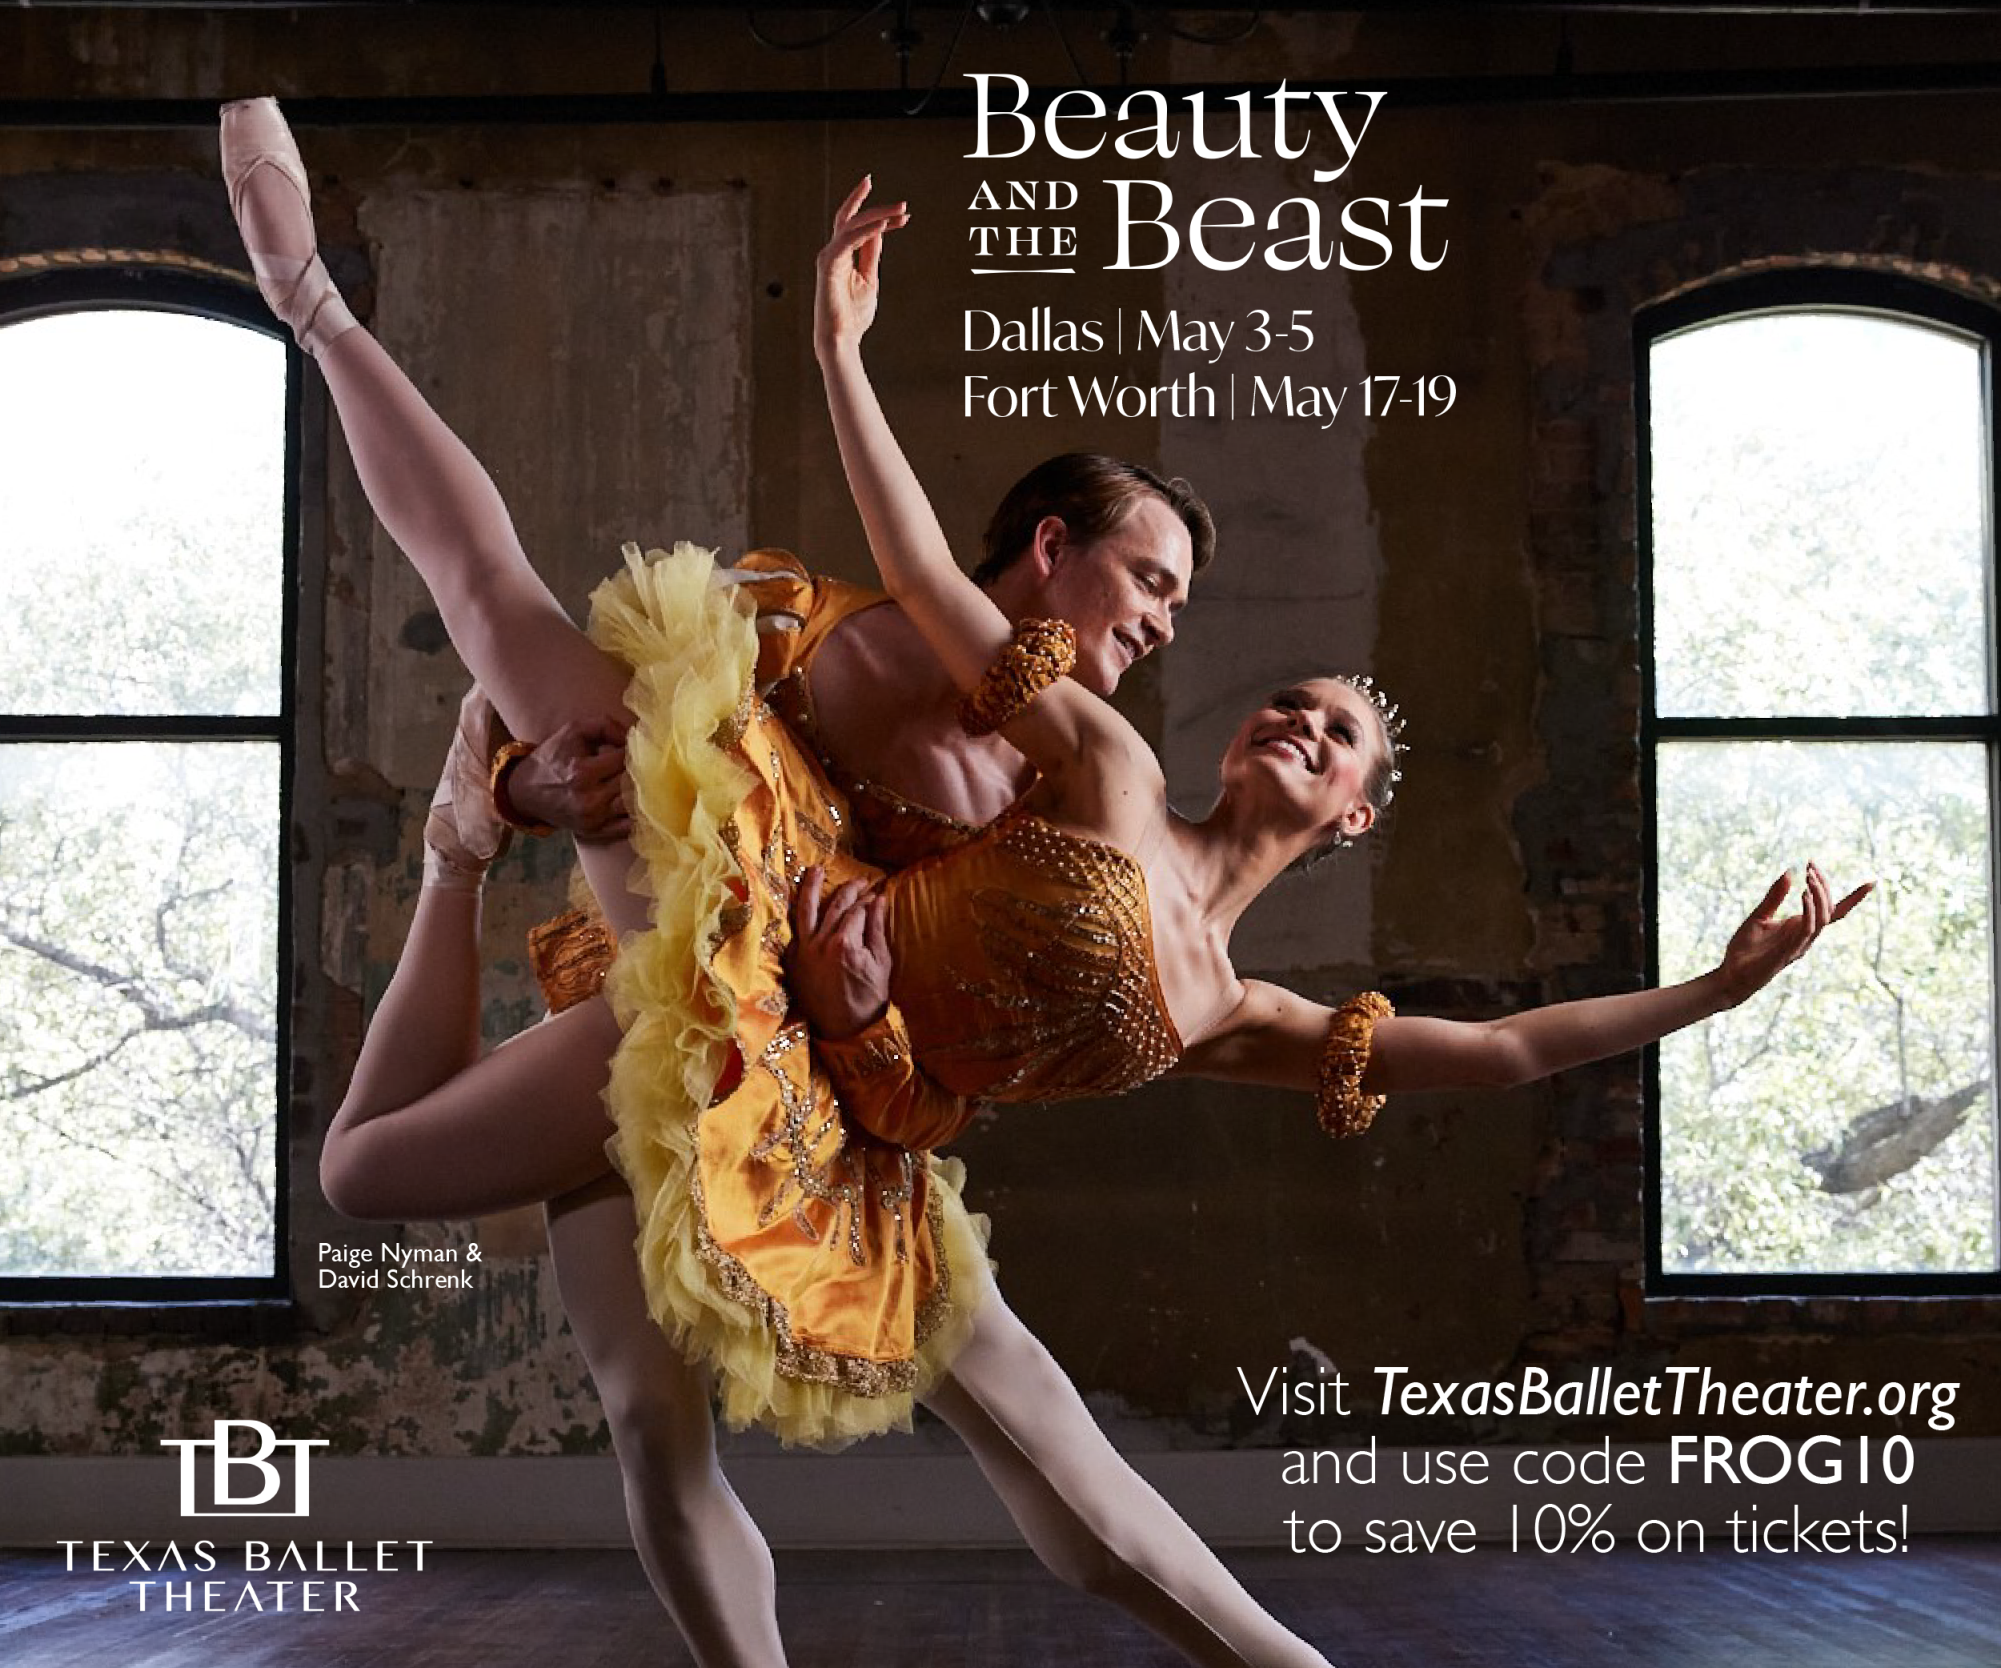 Ad: Texas Ballet Theater. Beauty and the Beast. Dallas May third through fifth. Fort Worth May seventeenth through nineteenth. Visit Texas Ballet Theater dot org and use code Frog ten to save 10 percent on tickets!